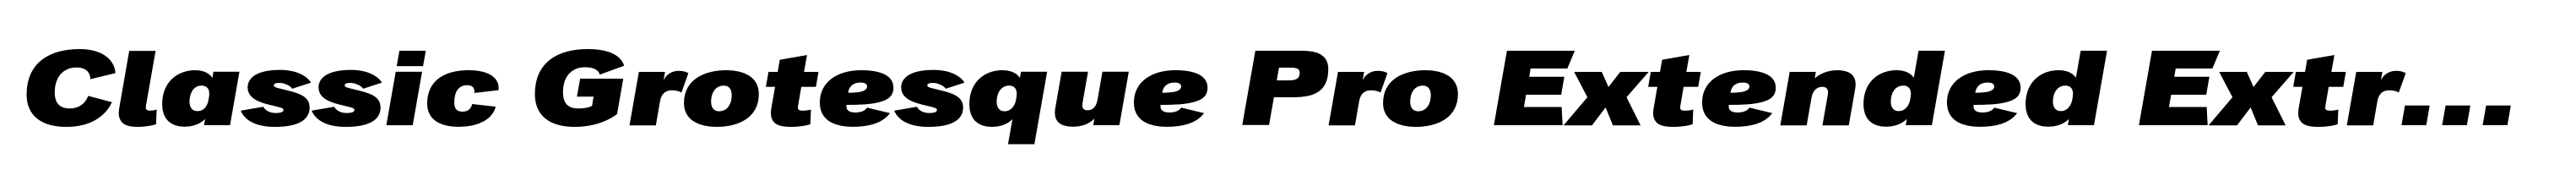 Classic Grotesque Pro Extended Extra Bold Italic